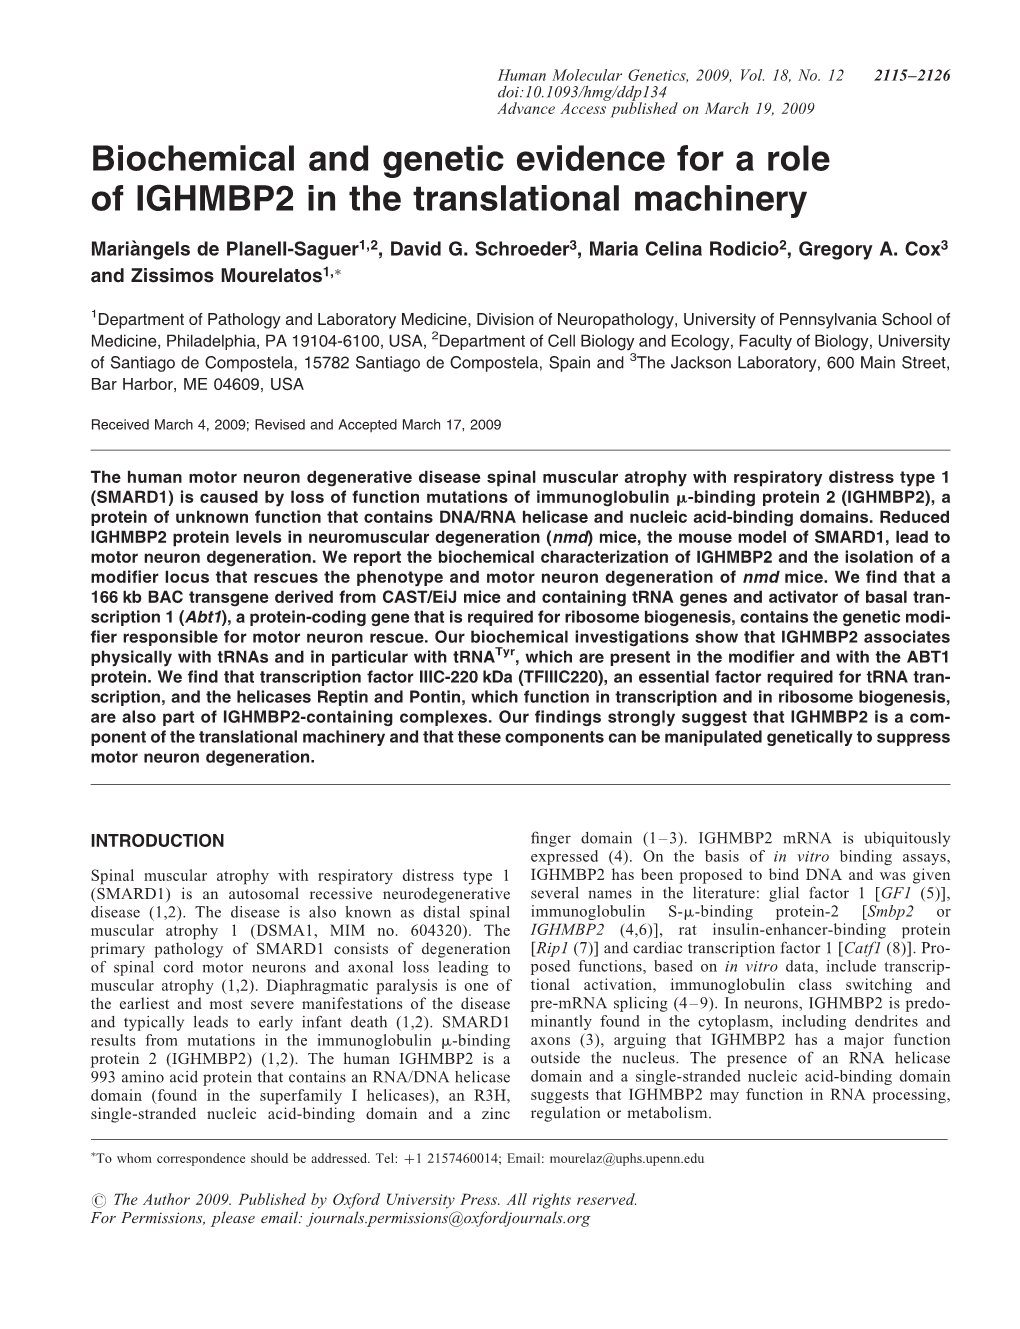 Biochemical and Genetic Evidence for a Role of IGHMBP2 in the Translational Machinery